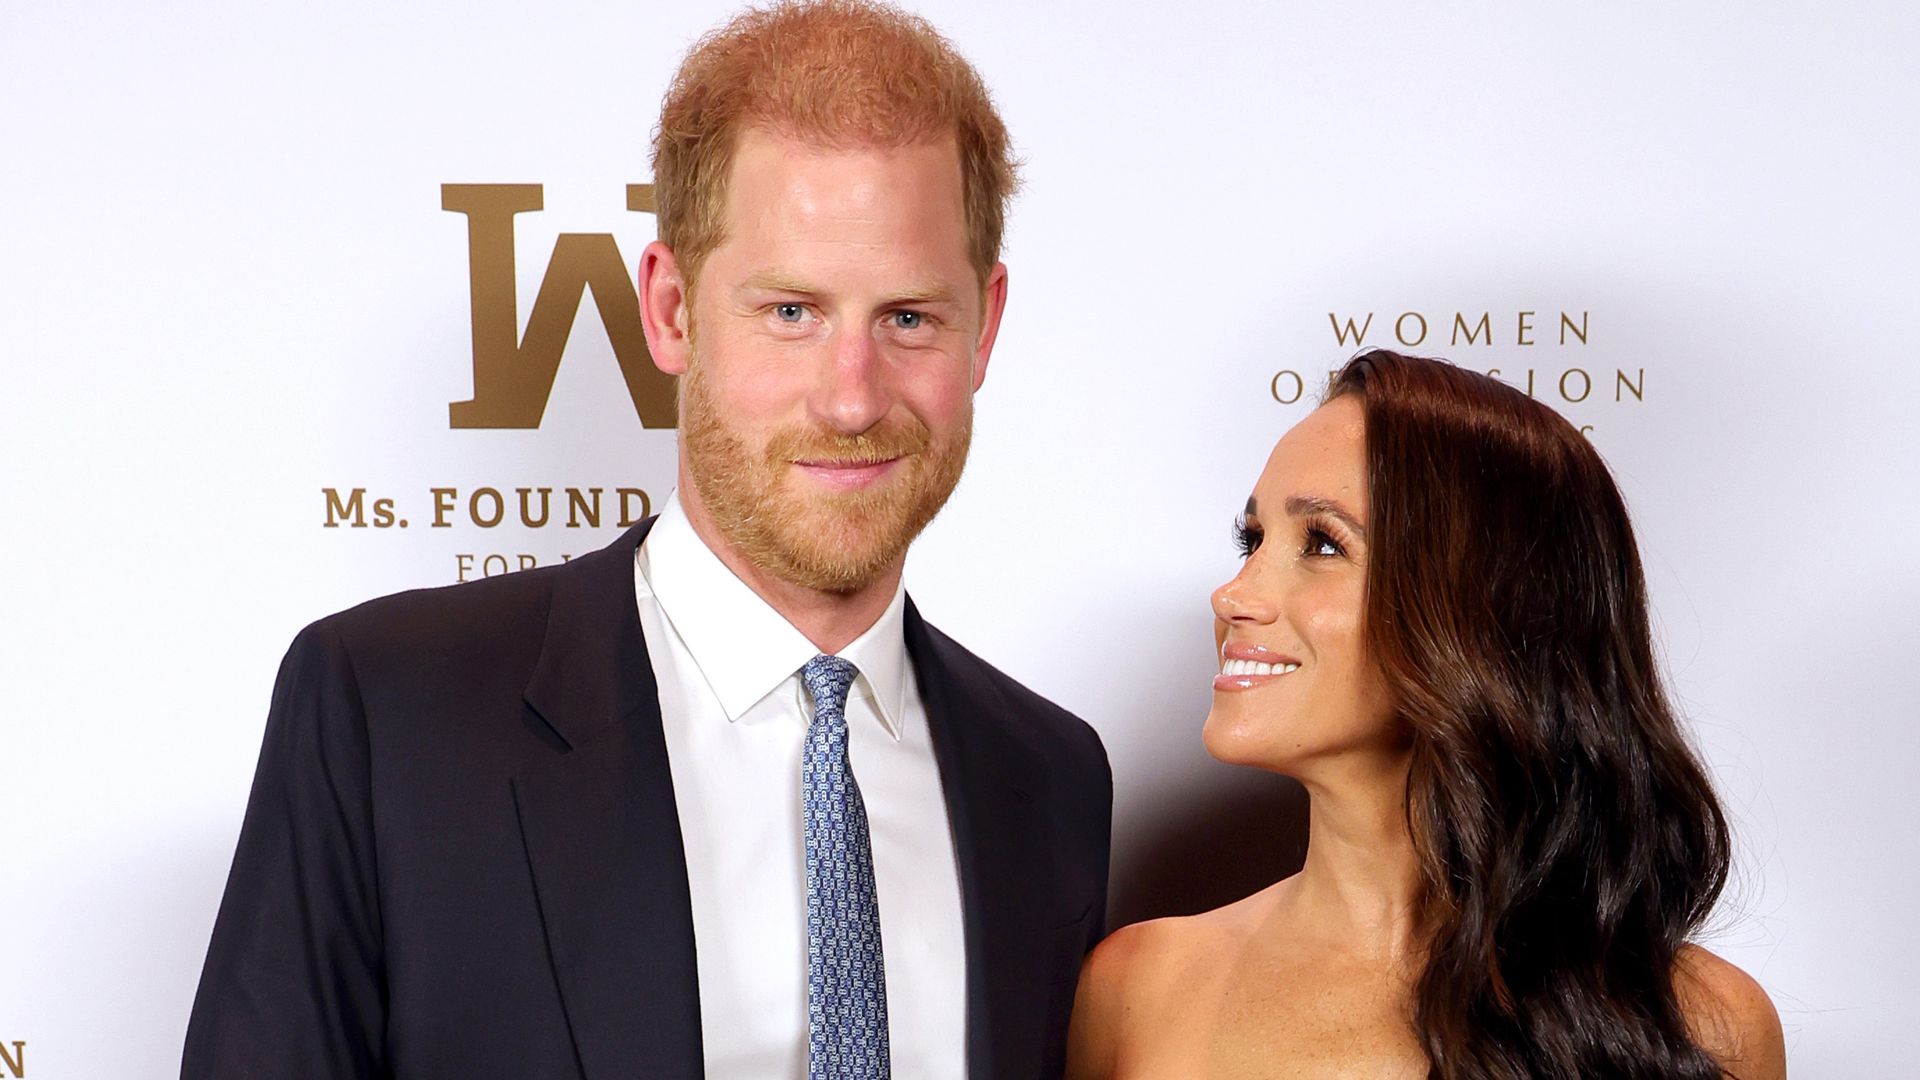 Meghan smiles at Prince Harry at the Women of Vision Awards